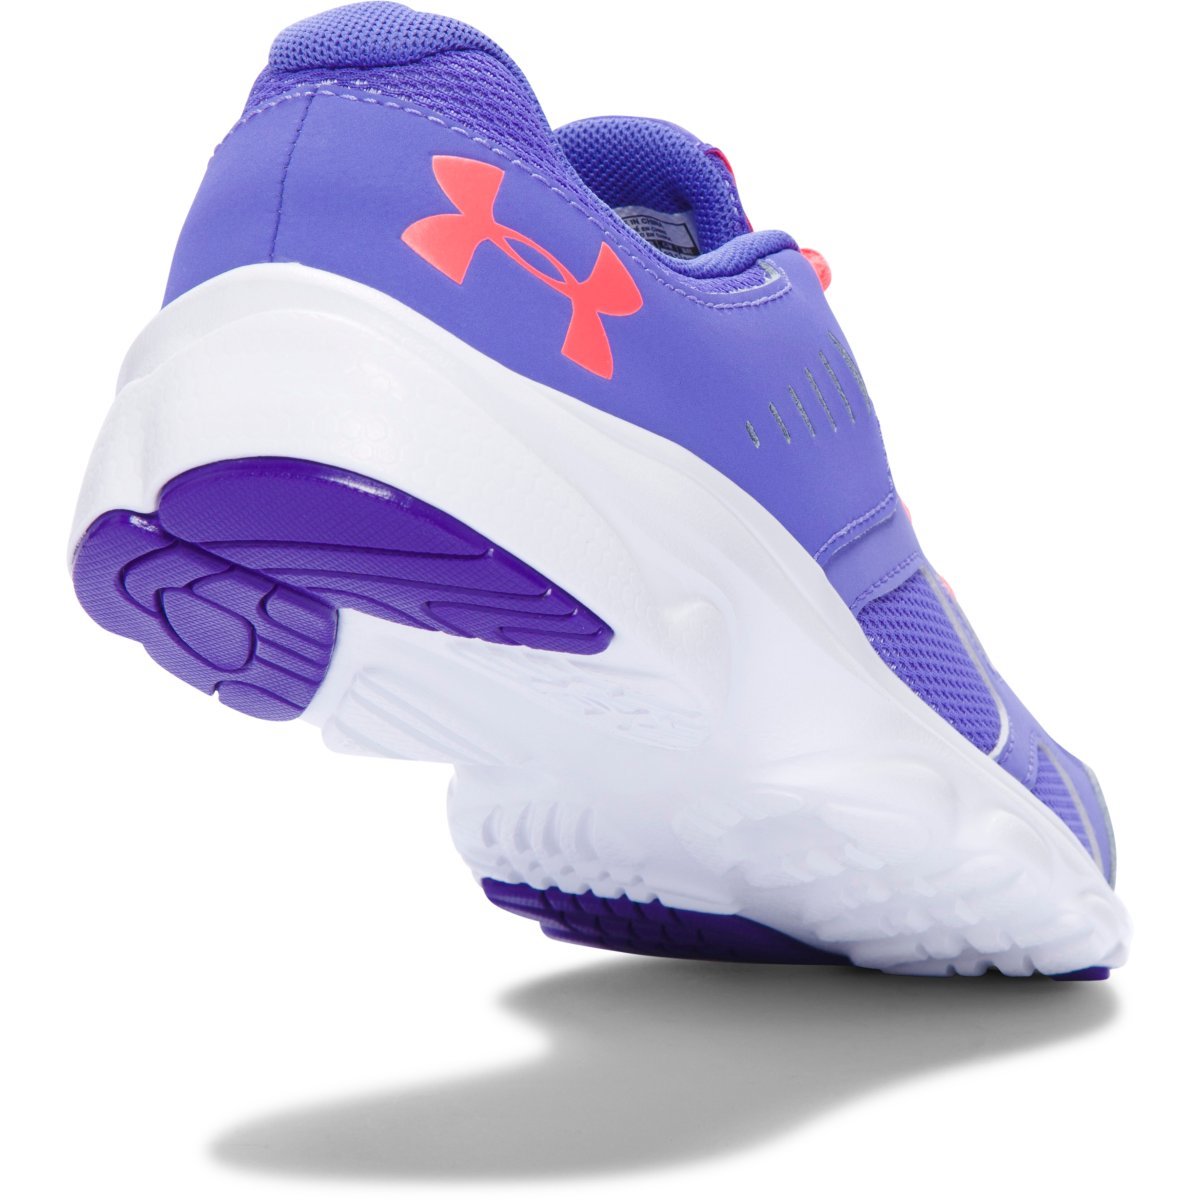 under armour girl shoes